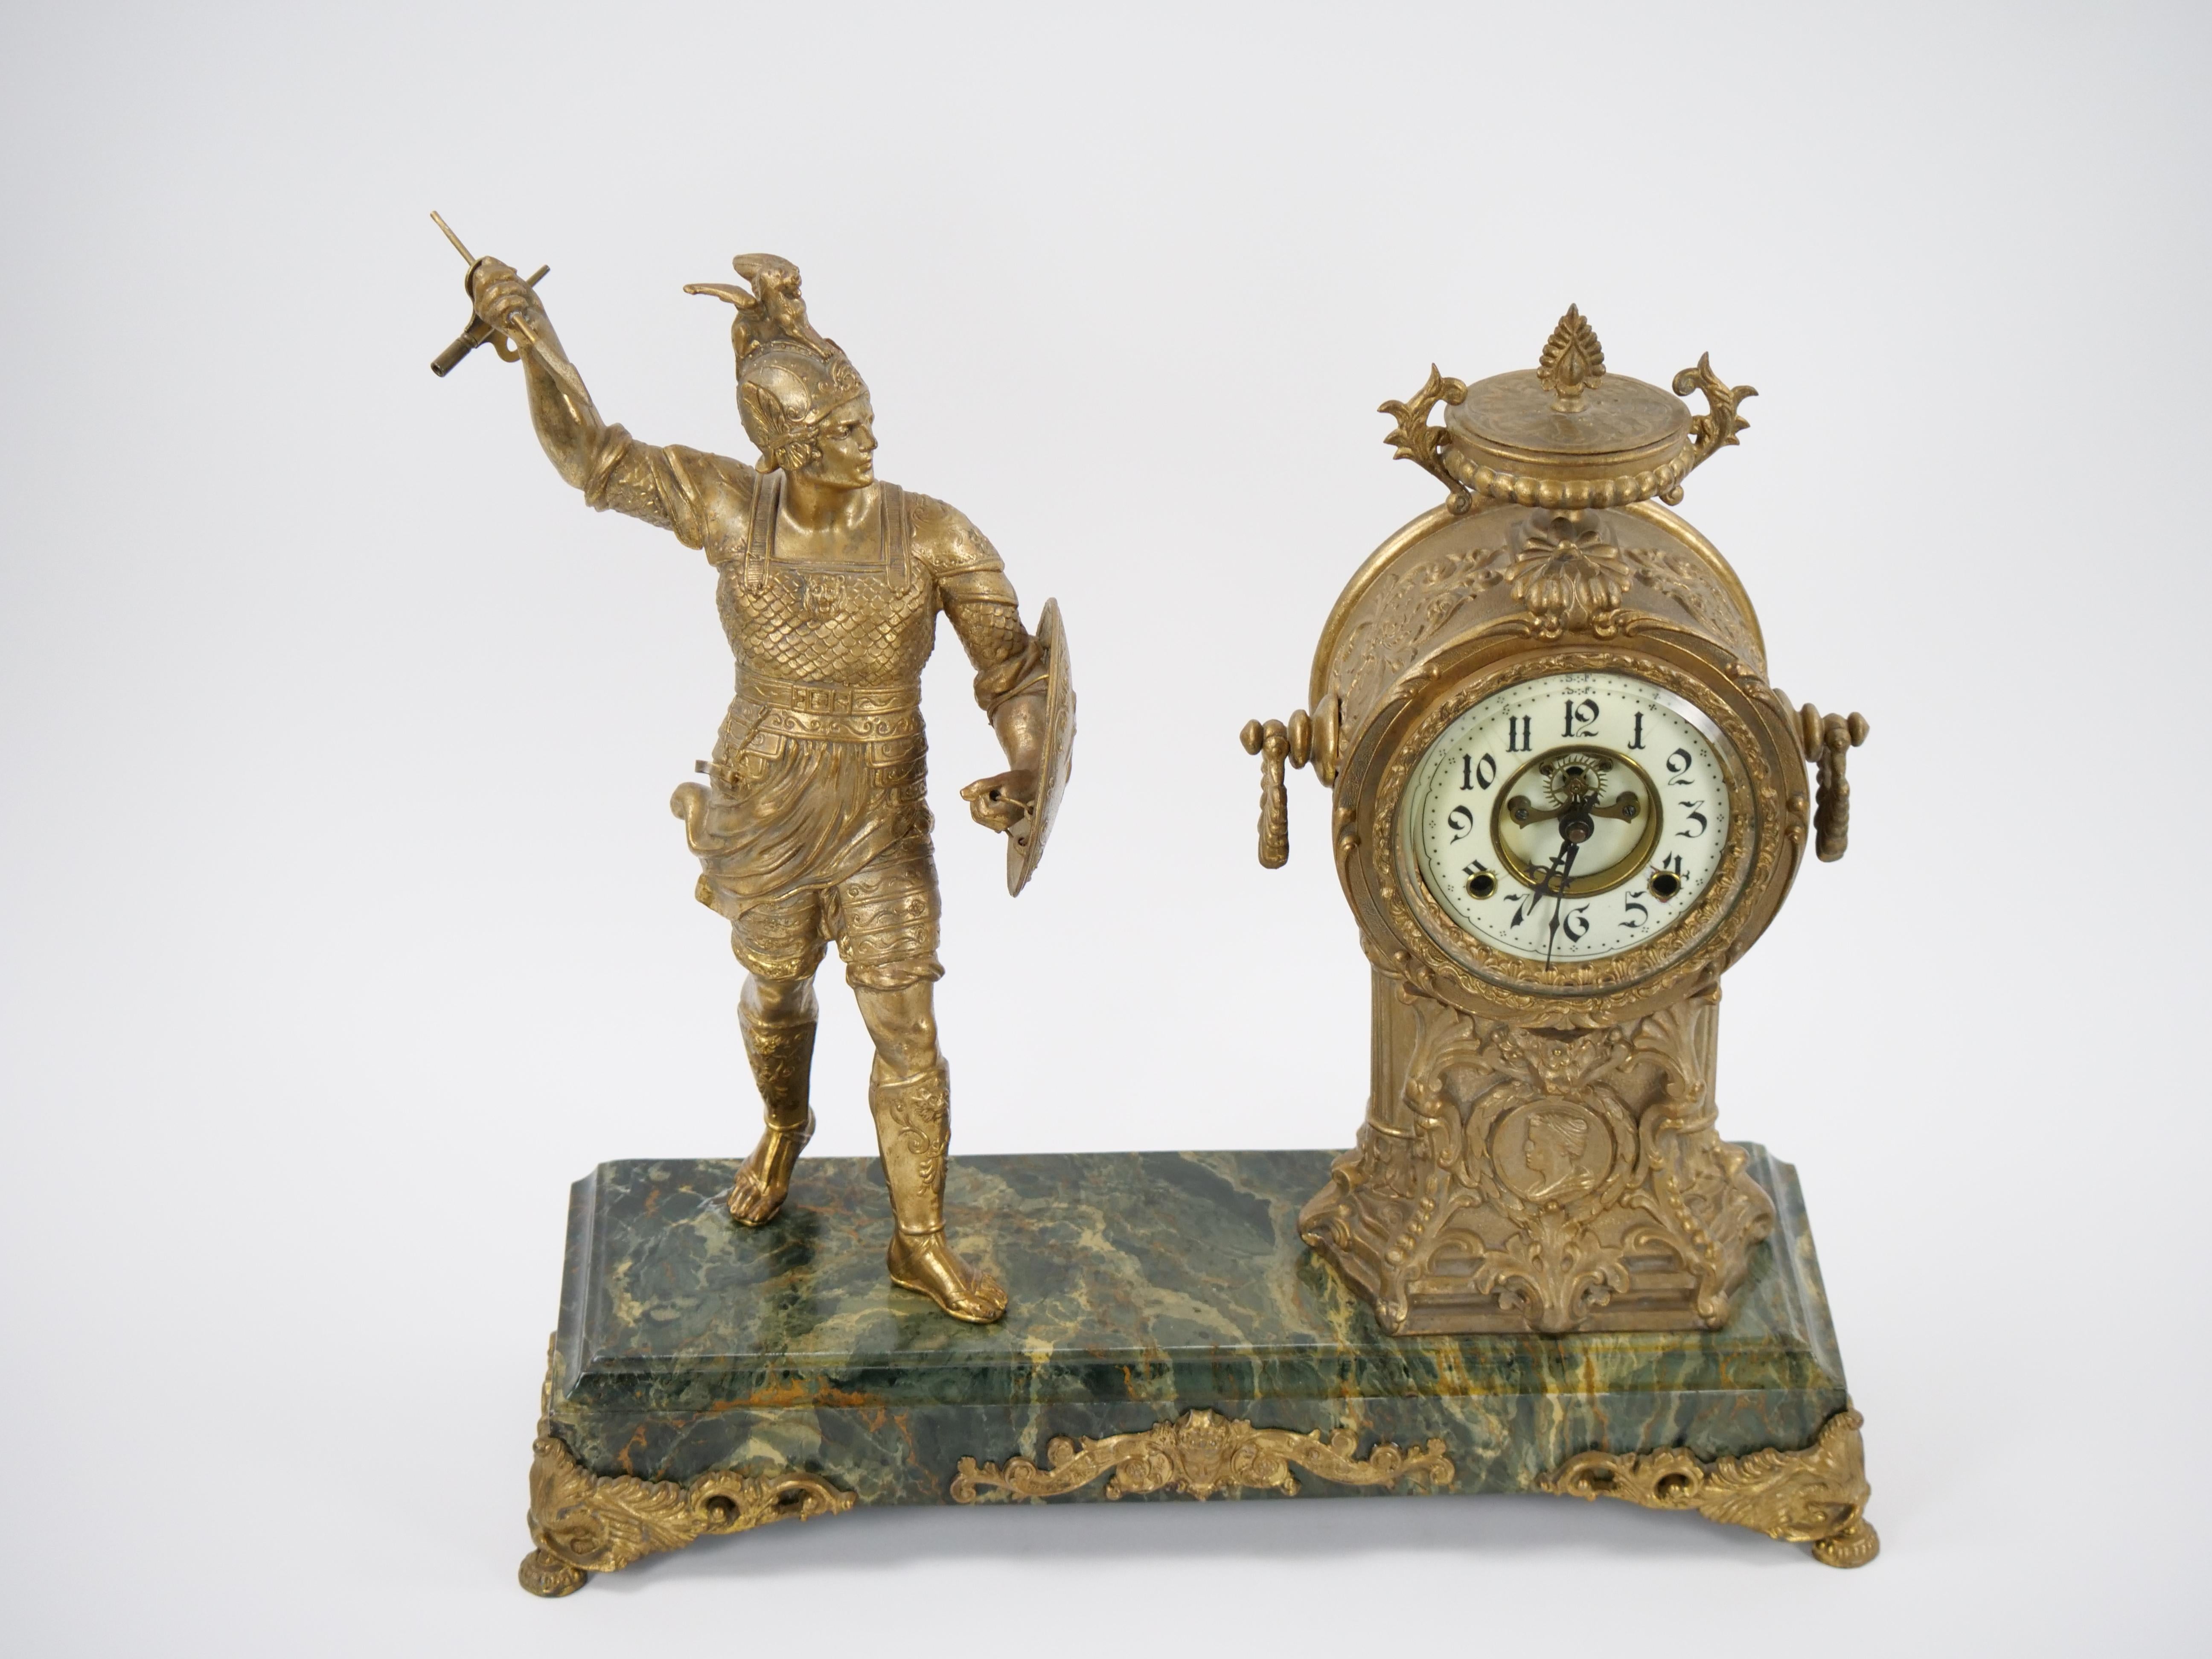  Gilt Bronze Footed Marble Base Mantel Clock Depicting Carthage Warrior For Sale 5